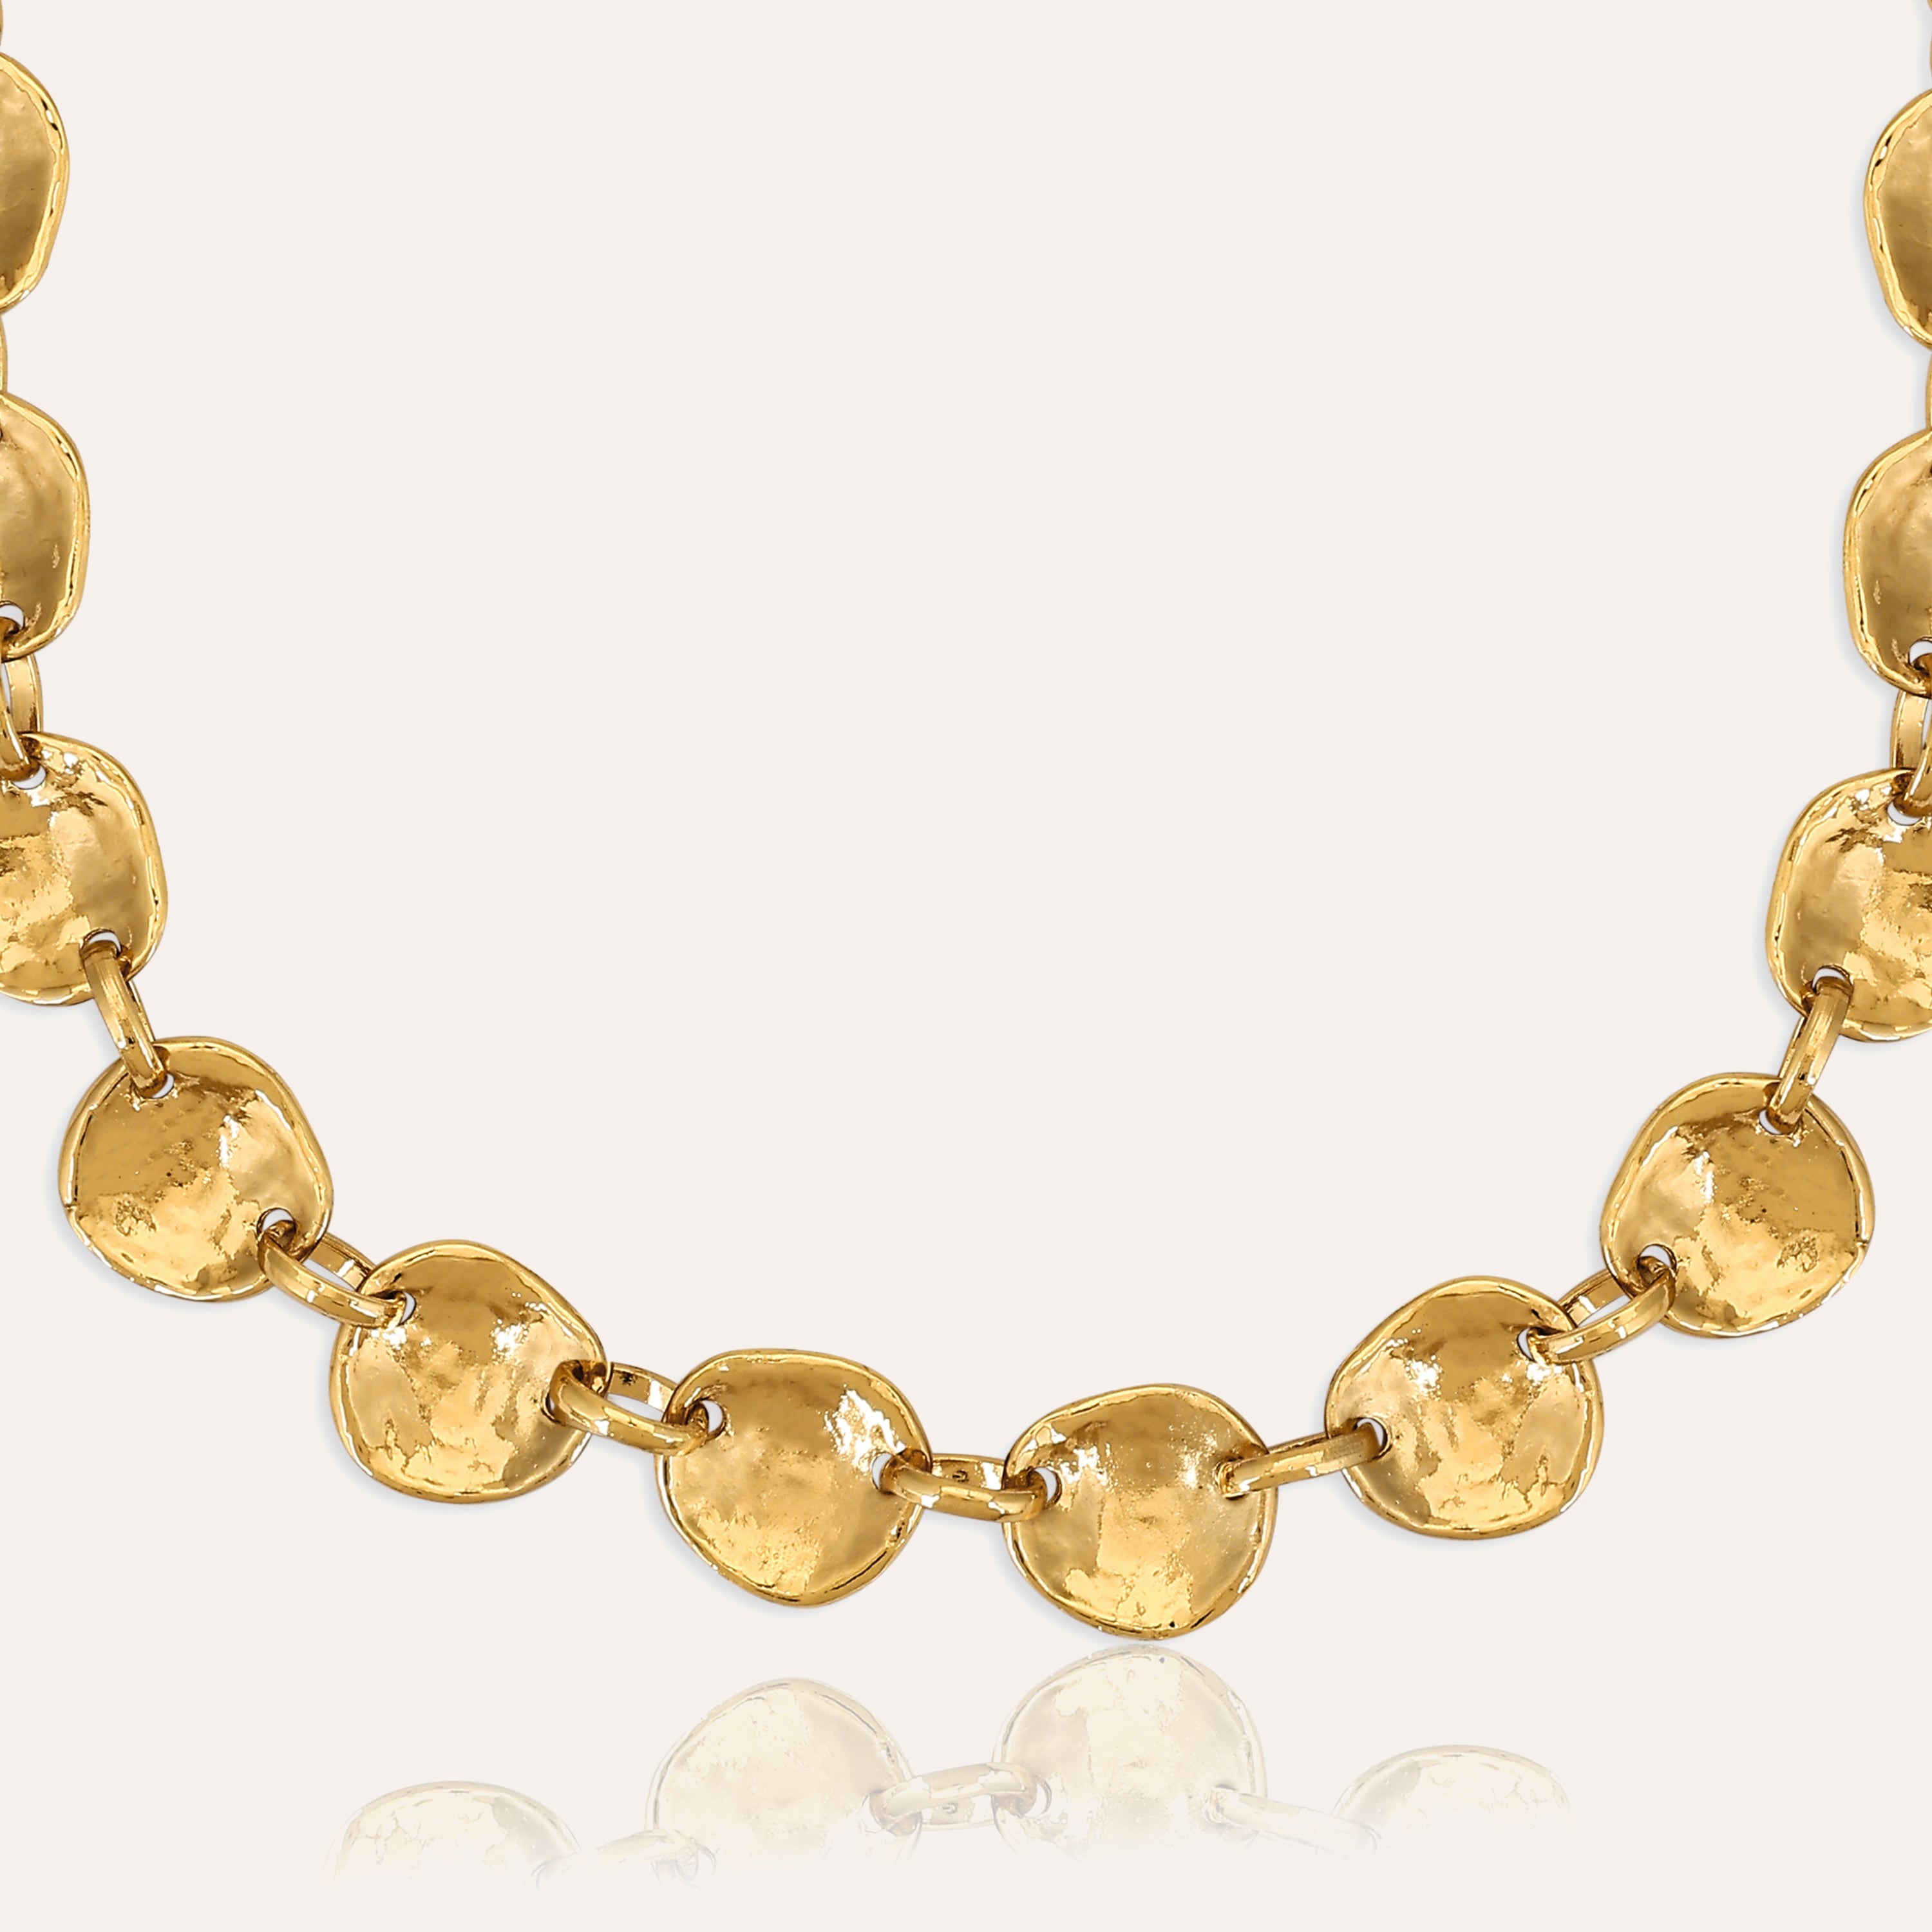 TFC Golden Stones Plated Necklace-Enhance your elegance with our collection of gold-plated necklaces for women. Choose from stunning pendant necklaces, chic choker necklaces, and trendy layered necklaces. Our sleek and dainty designs are both affordable and anti-tarnish, ensuring lasting beauty. Enjoy the cheapest fashion jewellery, lightweight and stylish- only at The Fun Company